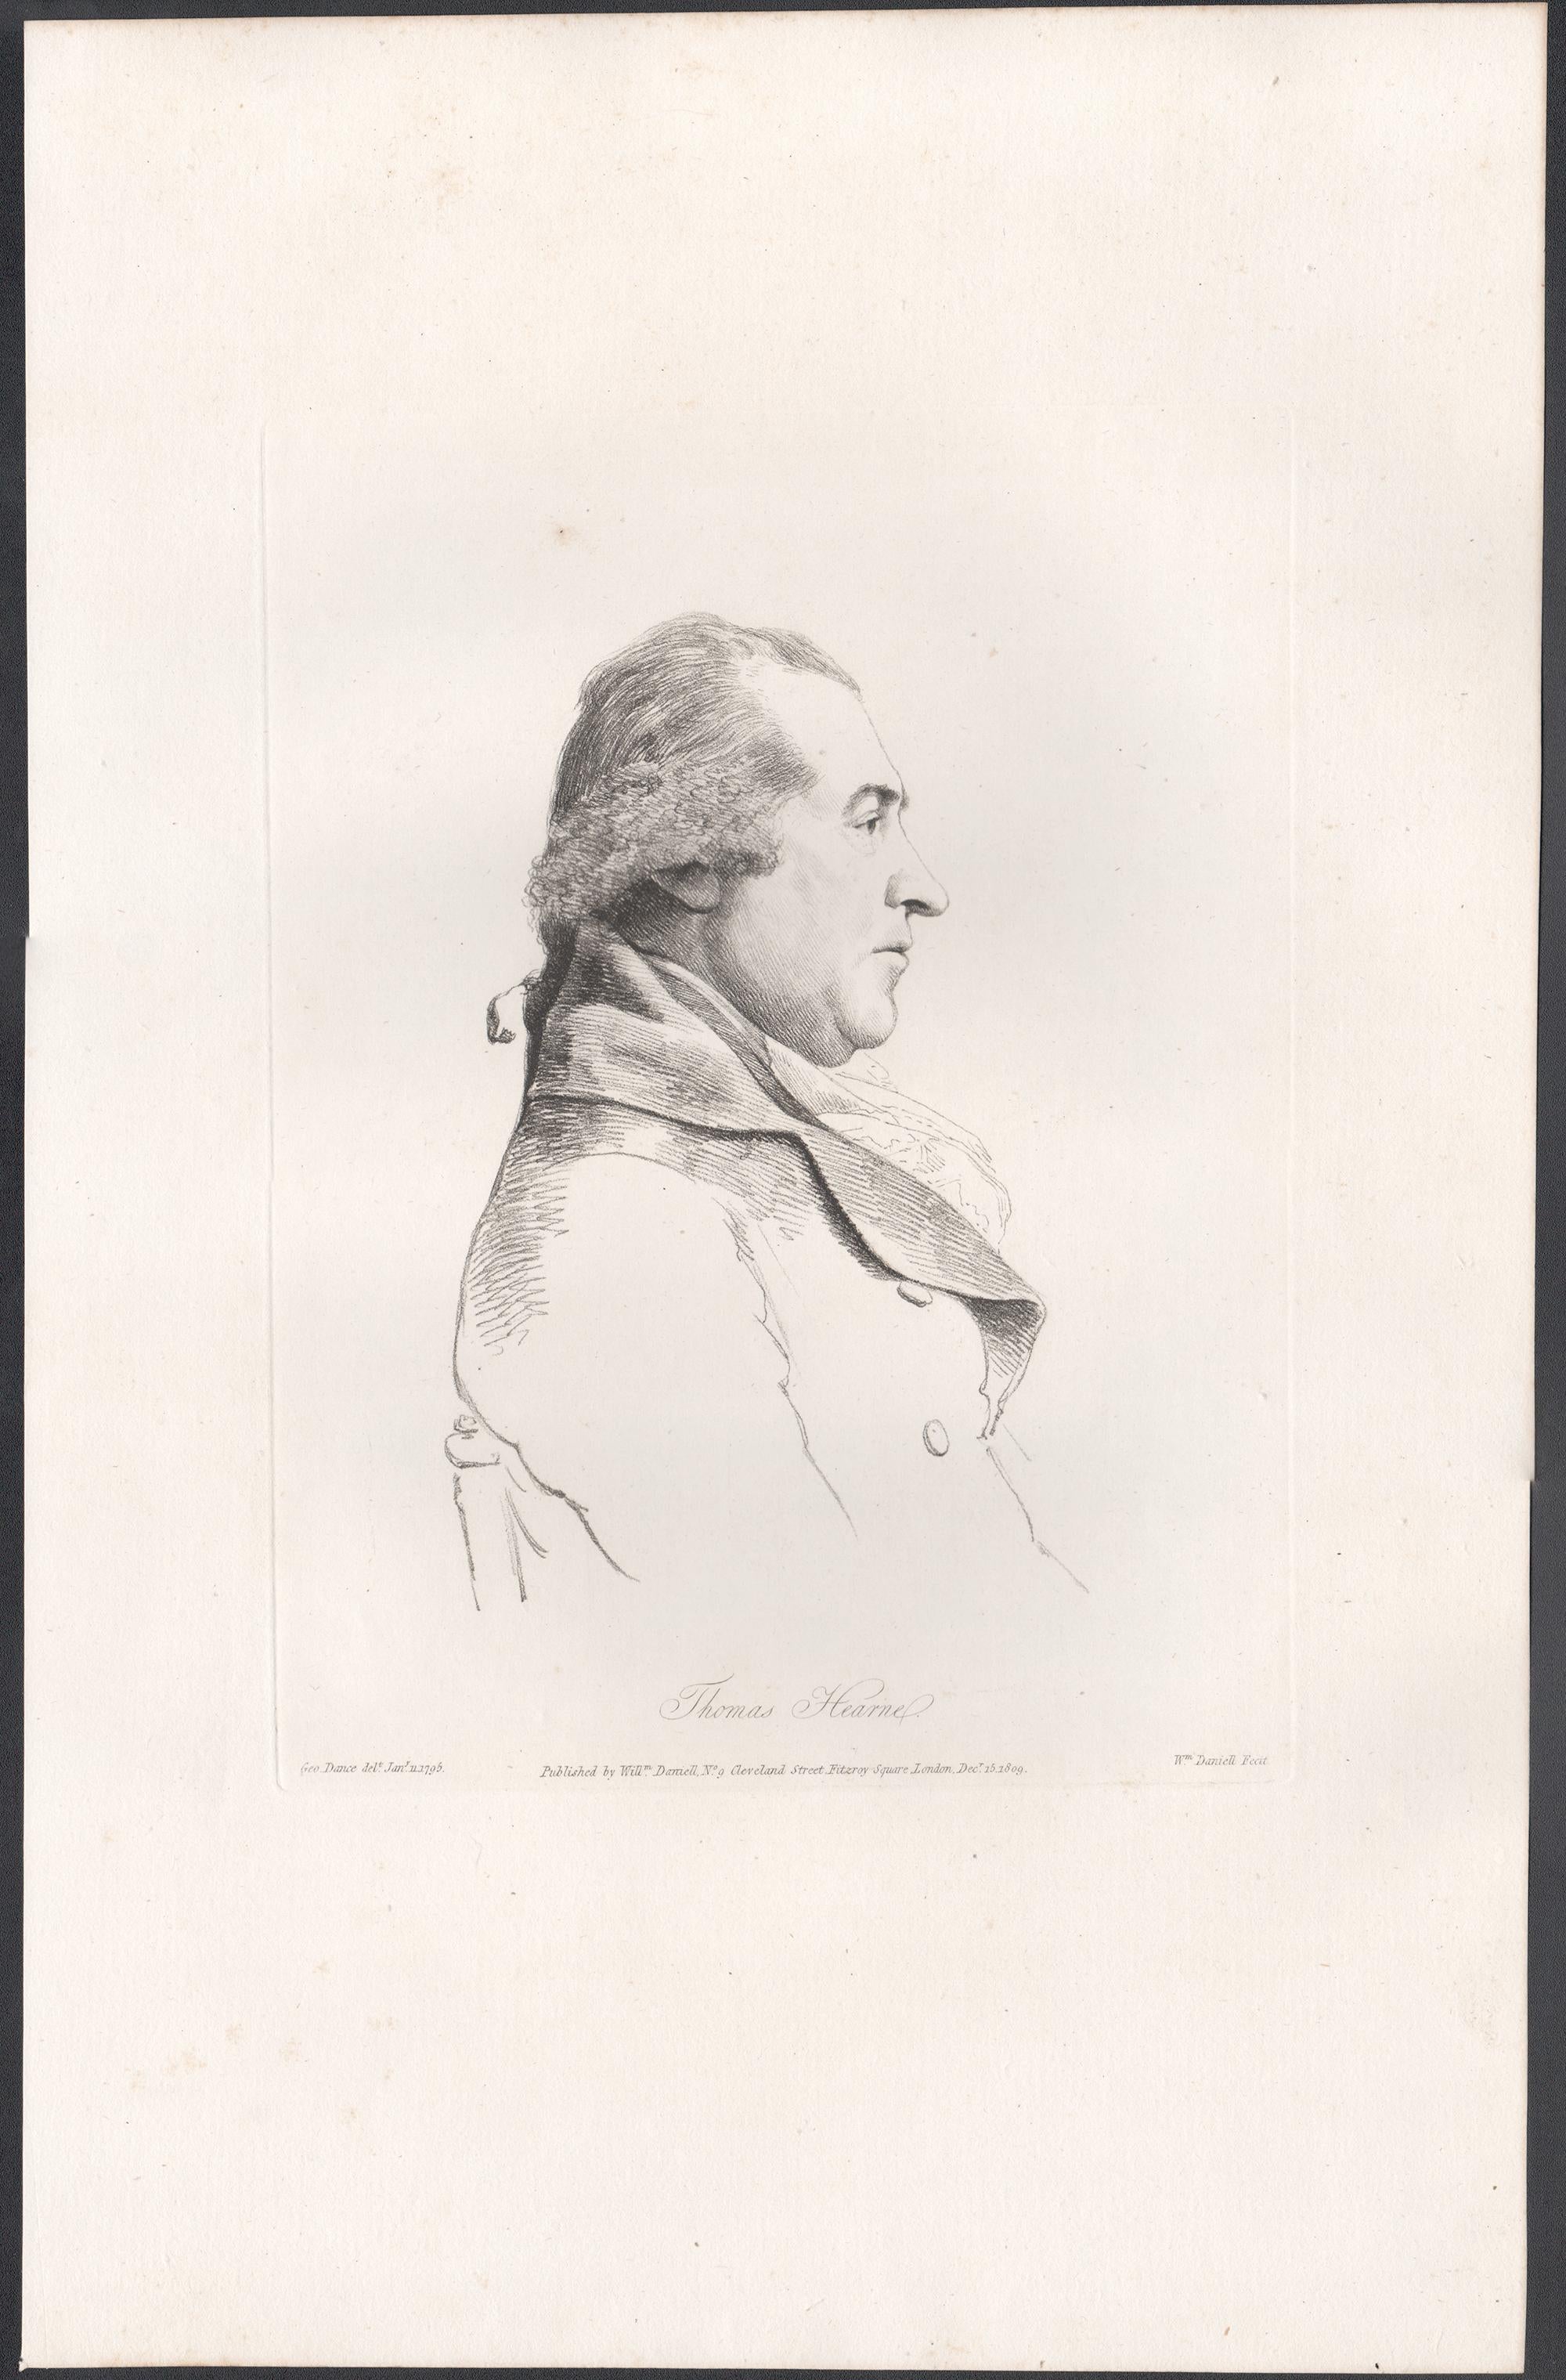 Thomas Hearne, artist, portrait, soft ground etching, 1809 - Print by William Daniell after George Dance